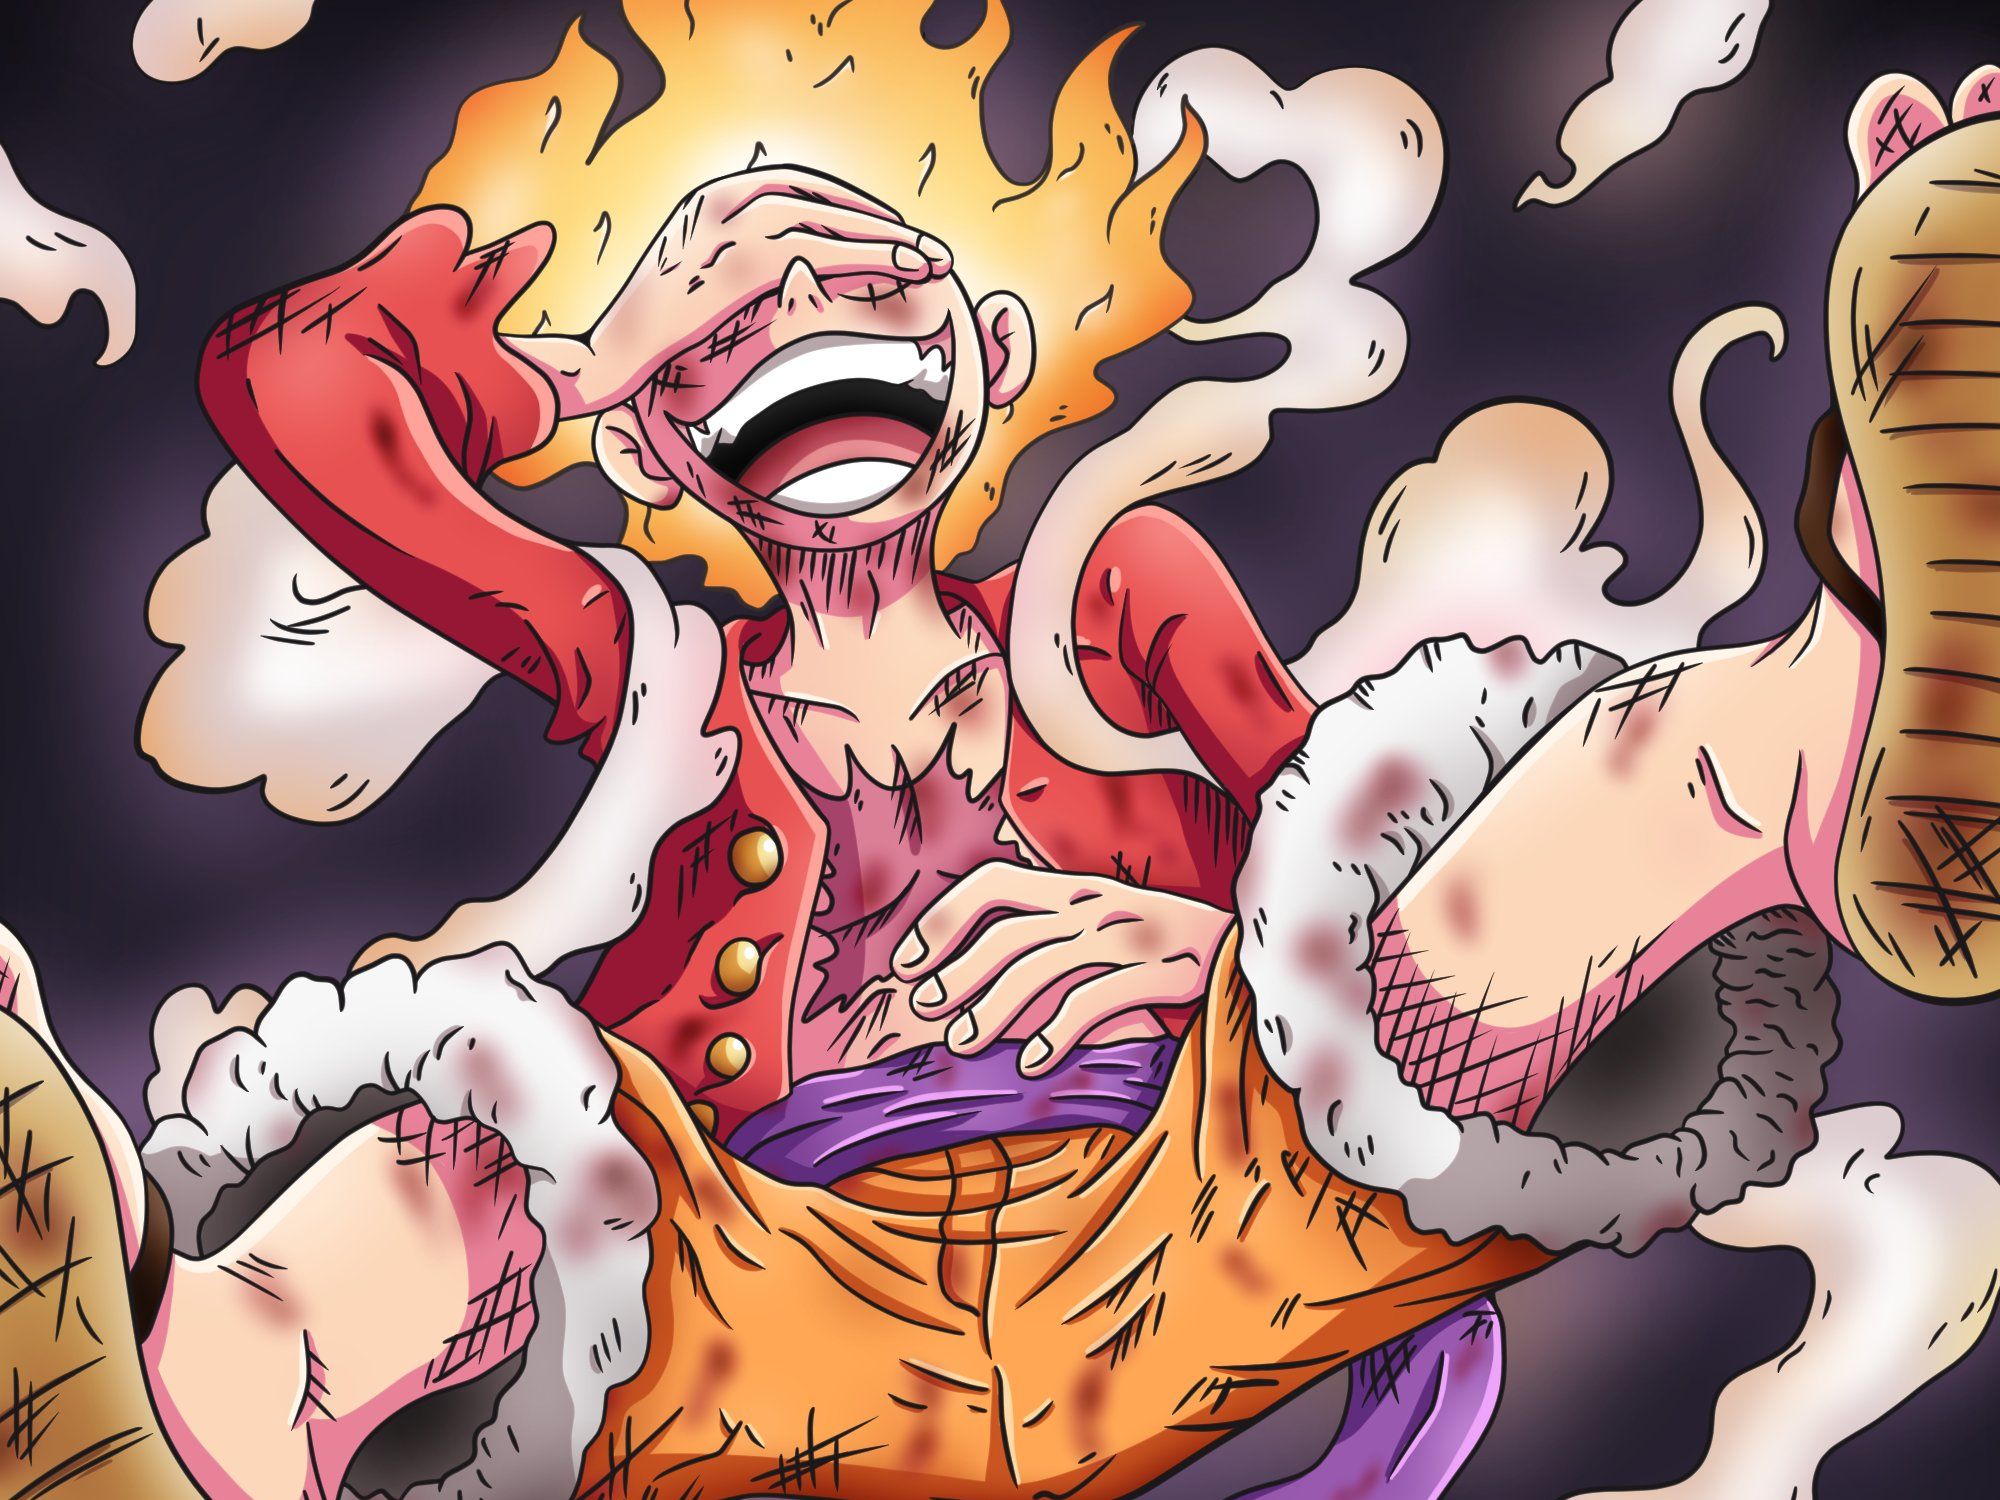 Luffy Gear 5 Wallpaper in 2023  One piece wallpaper iphone, Manga anime  one piece, Anime